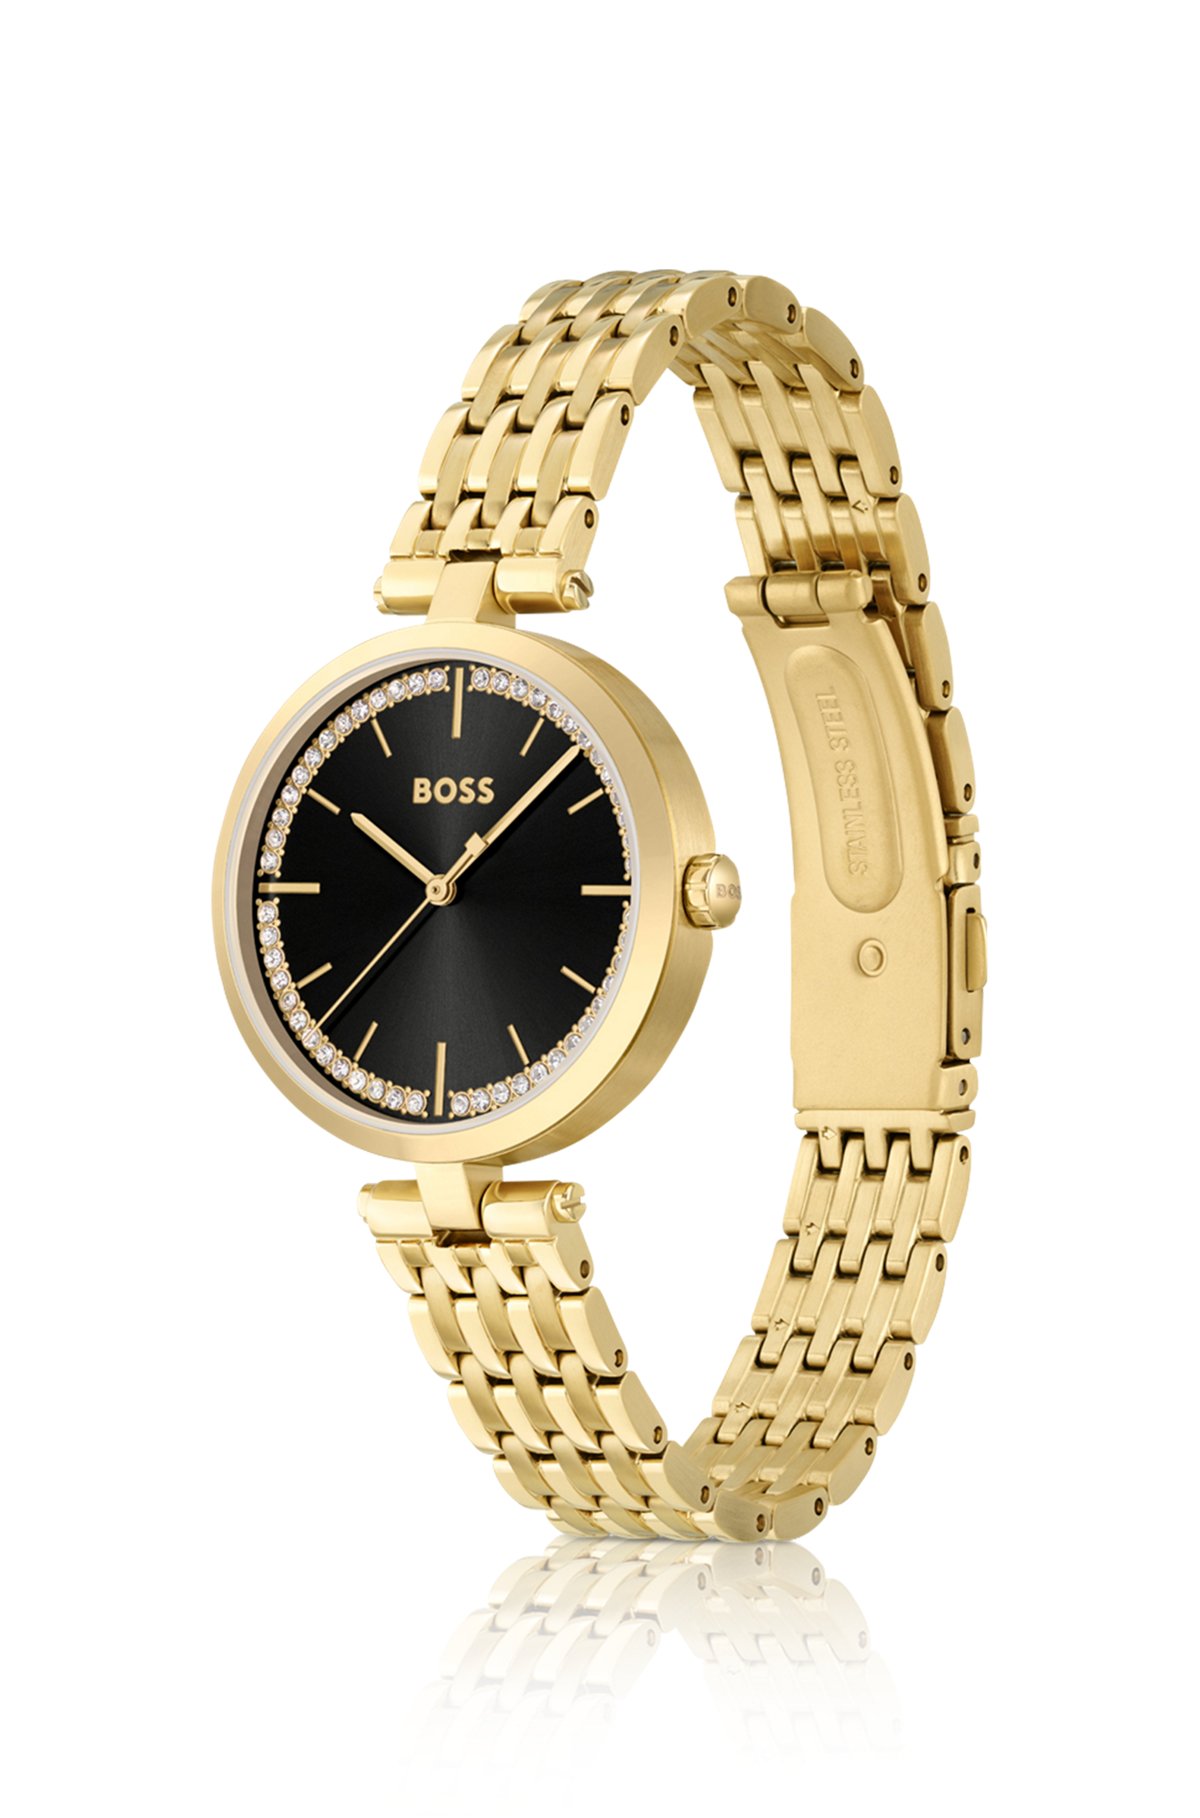 Gold-tone watch with link bracelet, Gold